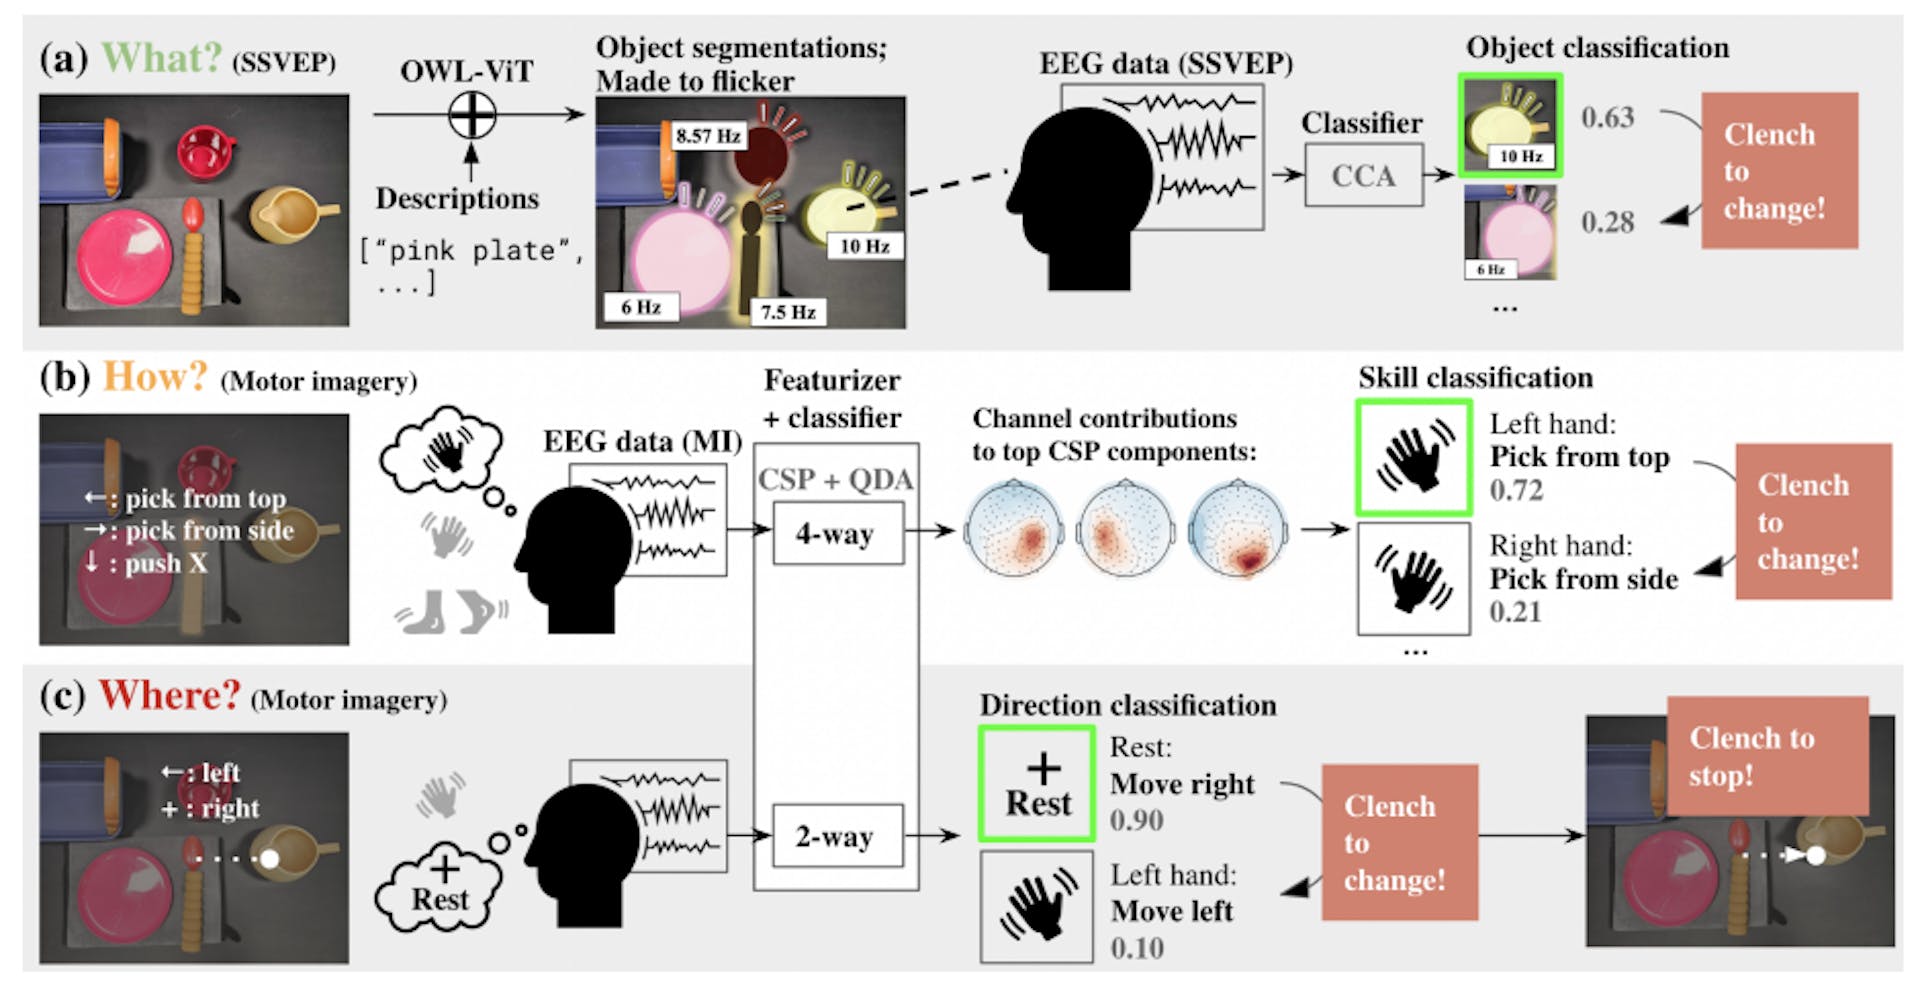 Figure 3: A modular pipeline for decoding human intended goals from EEG signals: (a) What object to manipulate, decoded from SSVEP signals using CCA classifiers; (b) How to interact with the object, decoded from MI signals using CSP+QDA algorithms; (c) Where to interact, decoded from MI signals. A safety mechanism that captures muscle tension from jaw clench is used to confirm or reject decoding results.